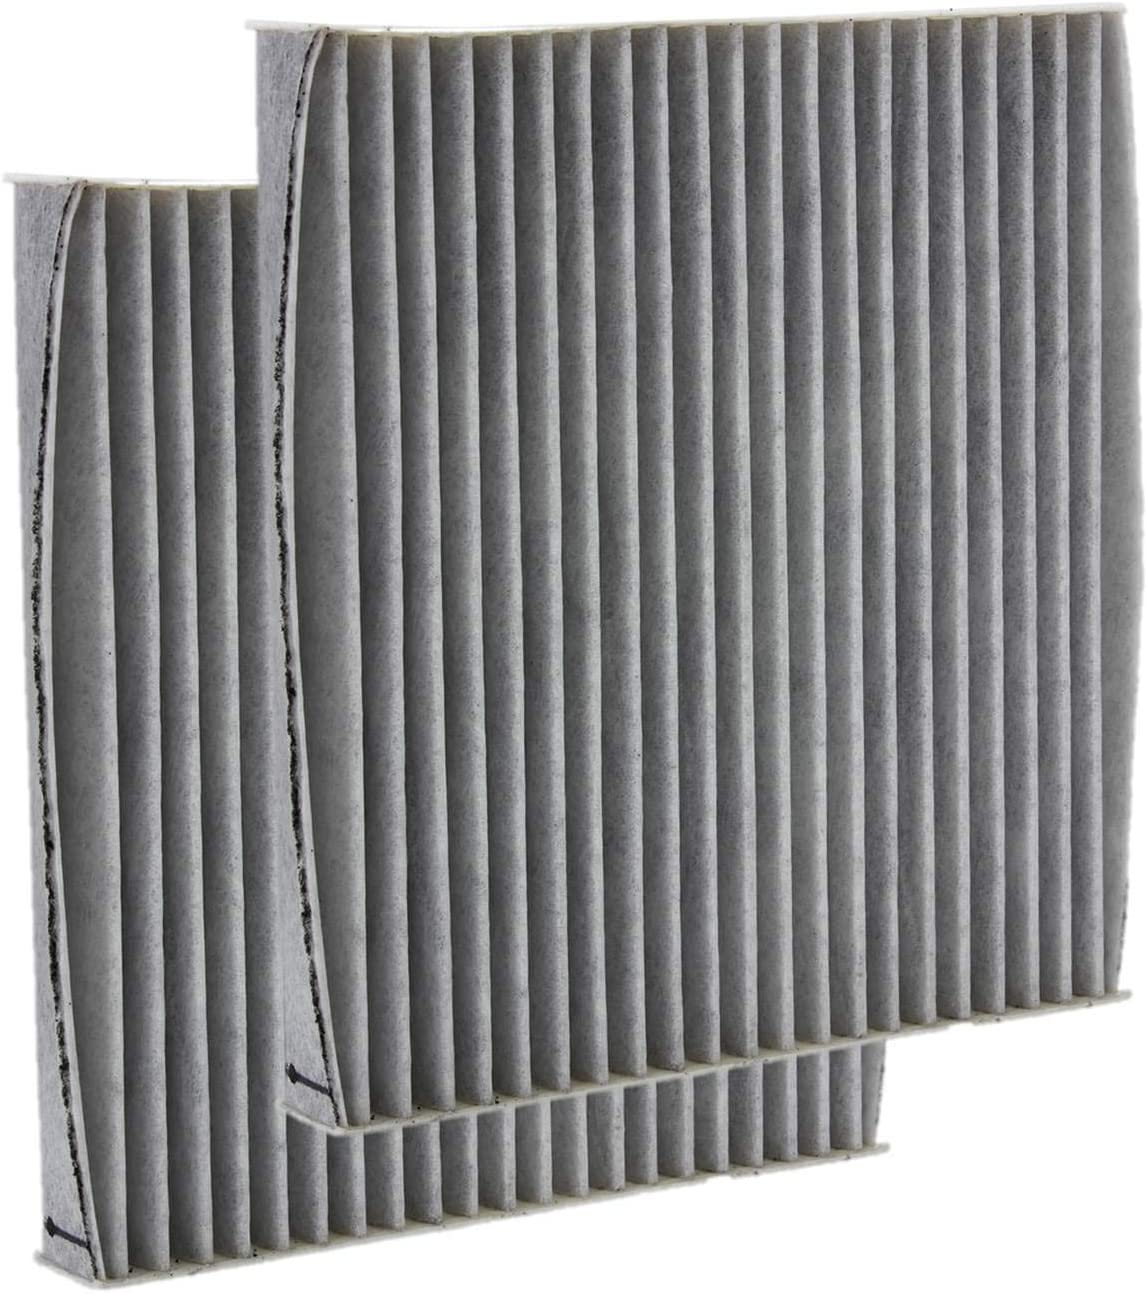 2 Pack Cabin Air Filter for KIA,Hyundai,Replacement for CP819,CF11819 (gray)